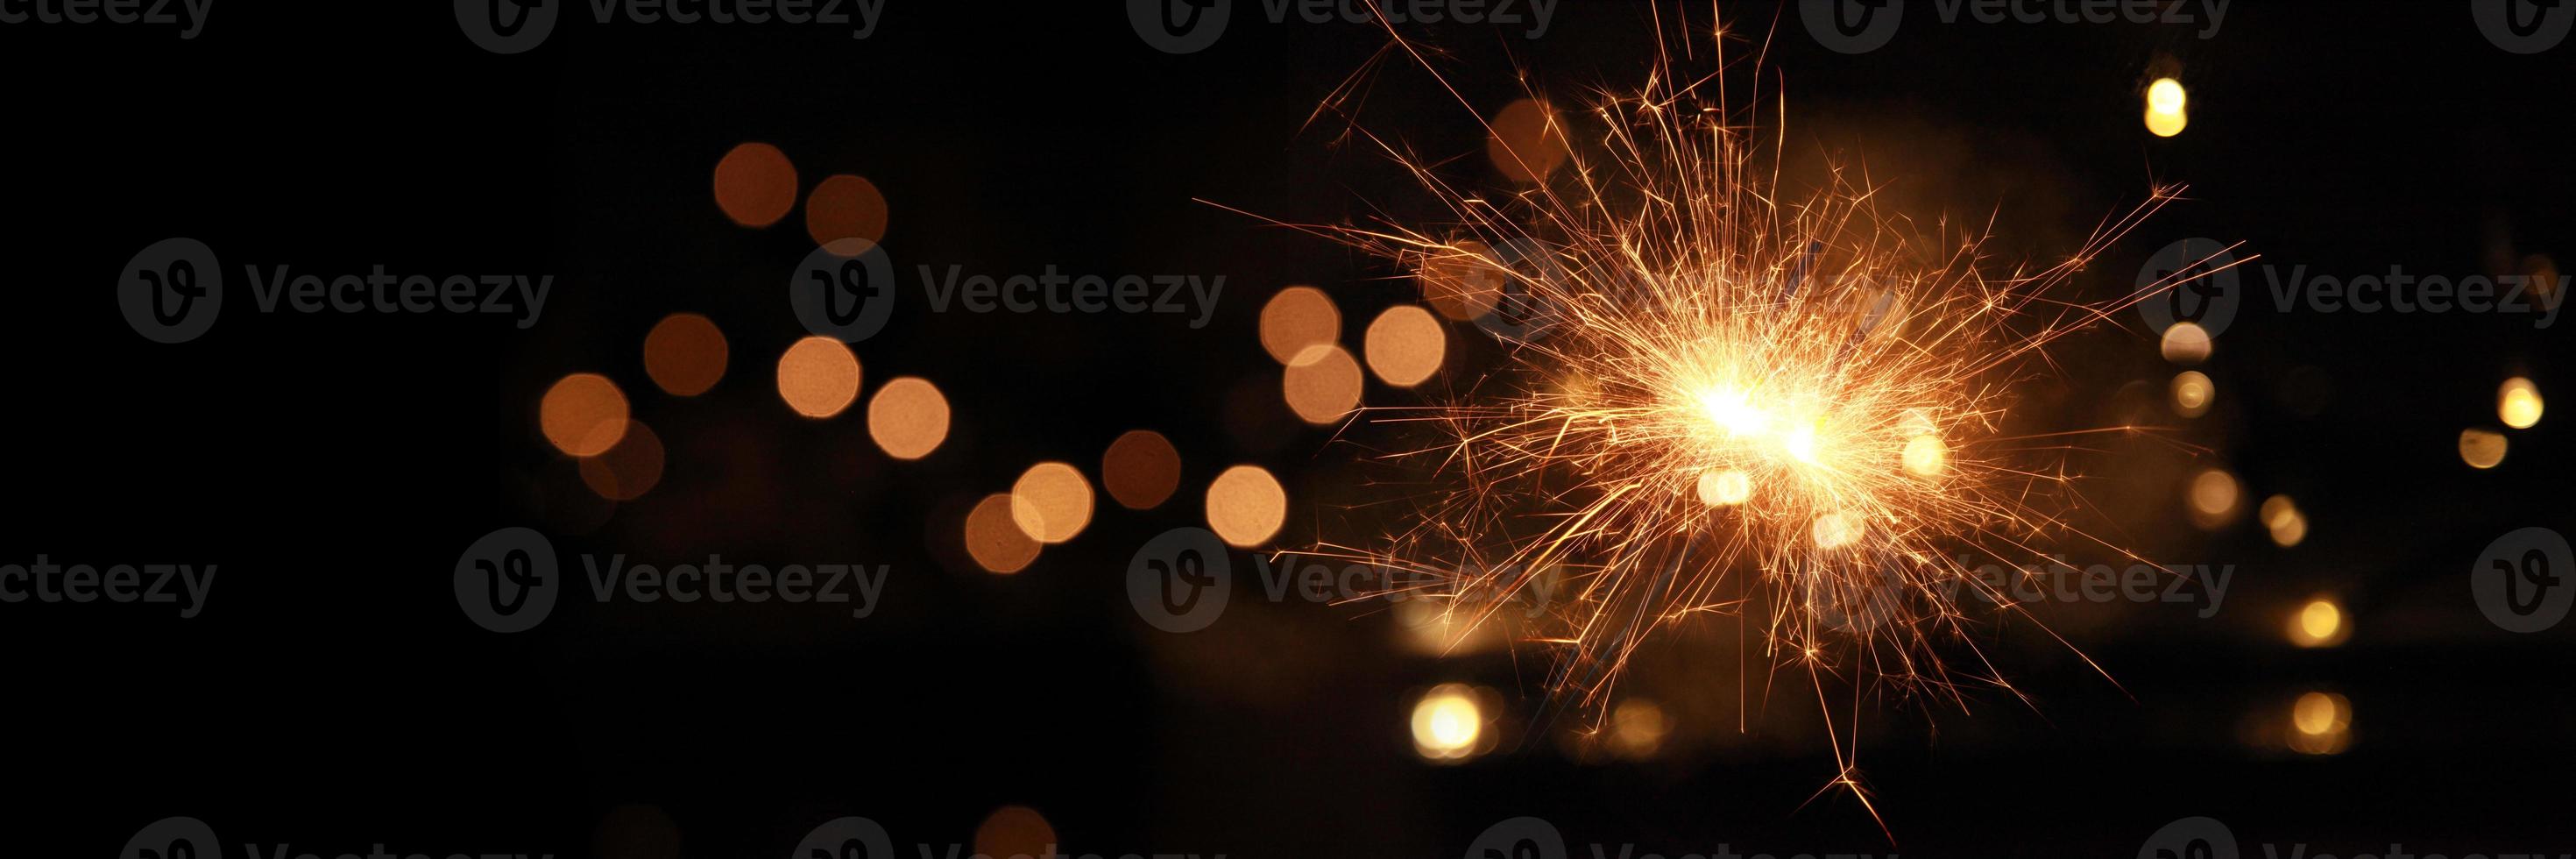 Happy New Year background with glowing sparklers. photo